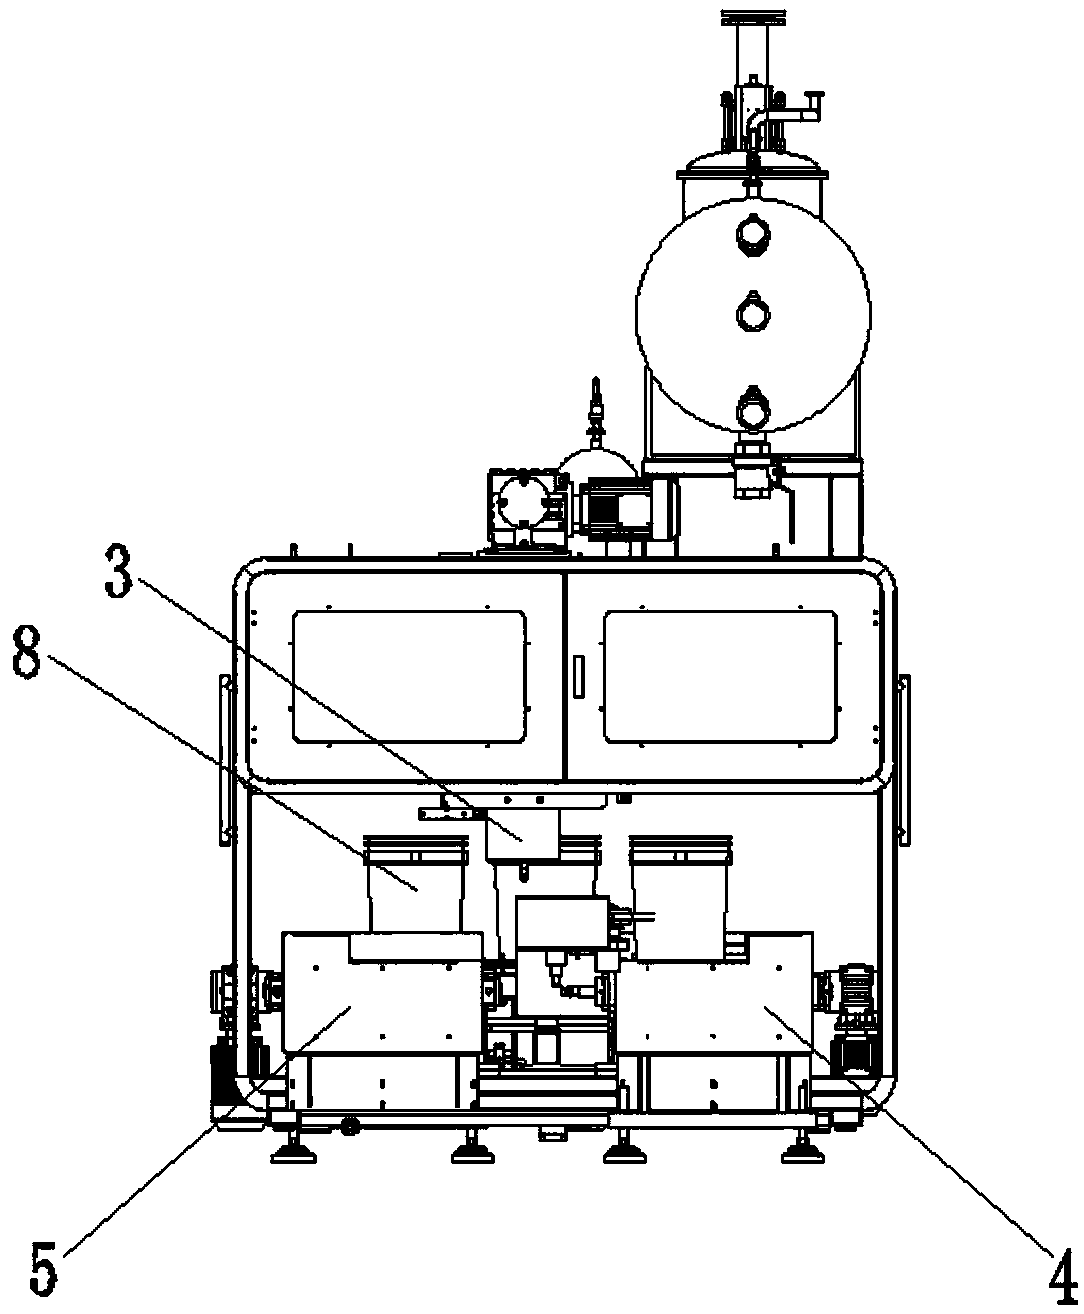 Three-row weighing and filling machine